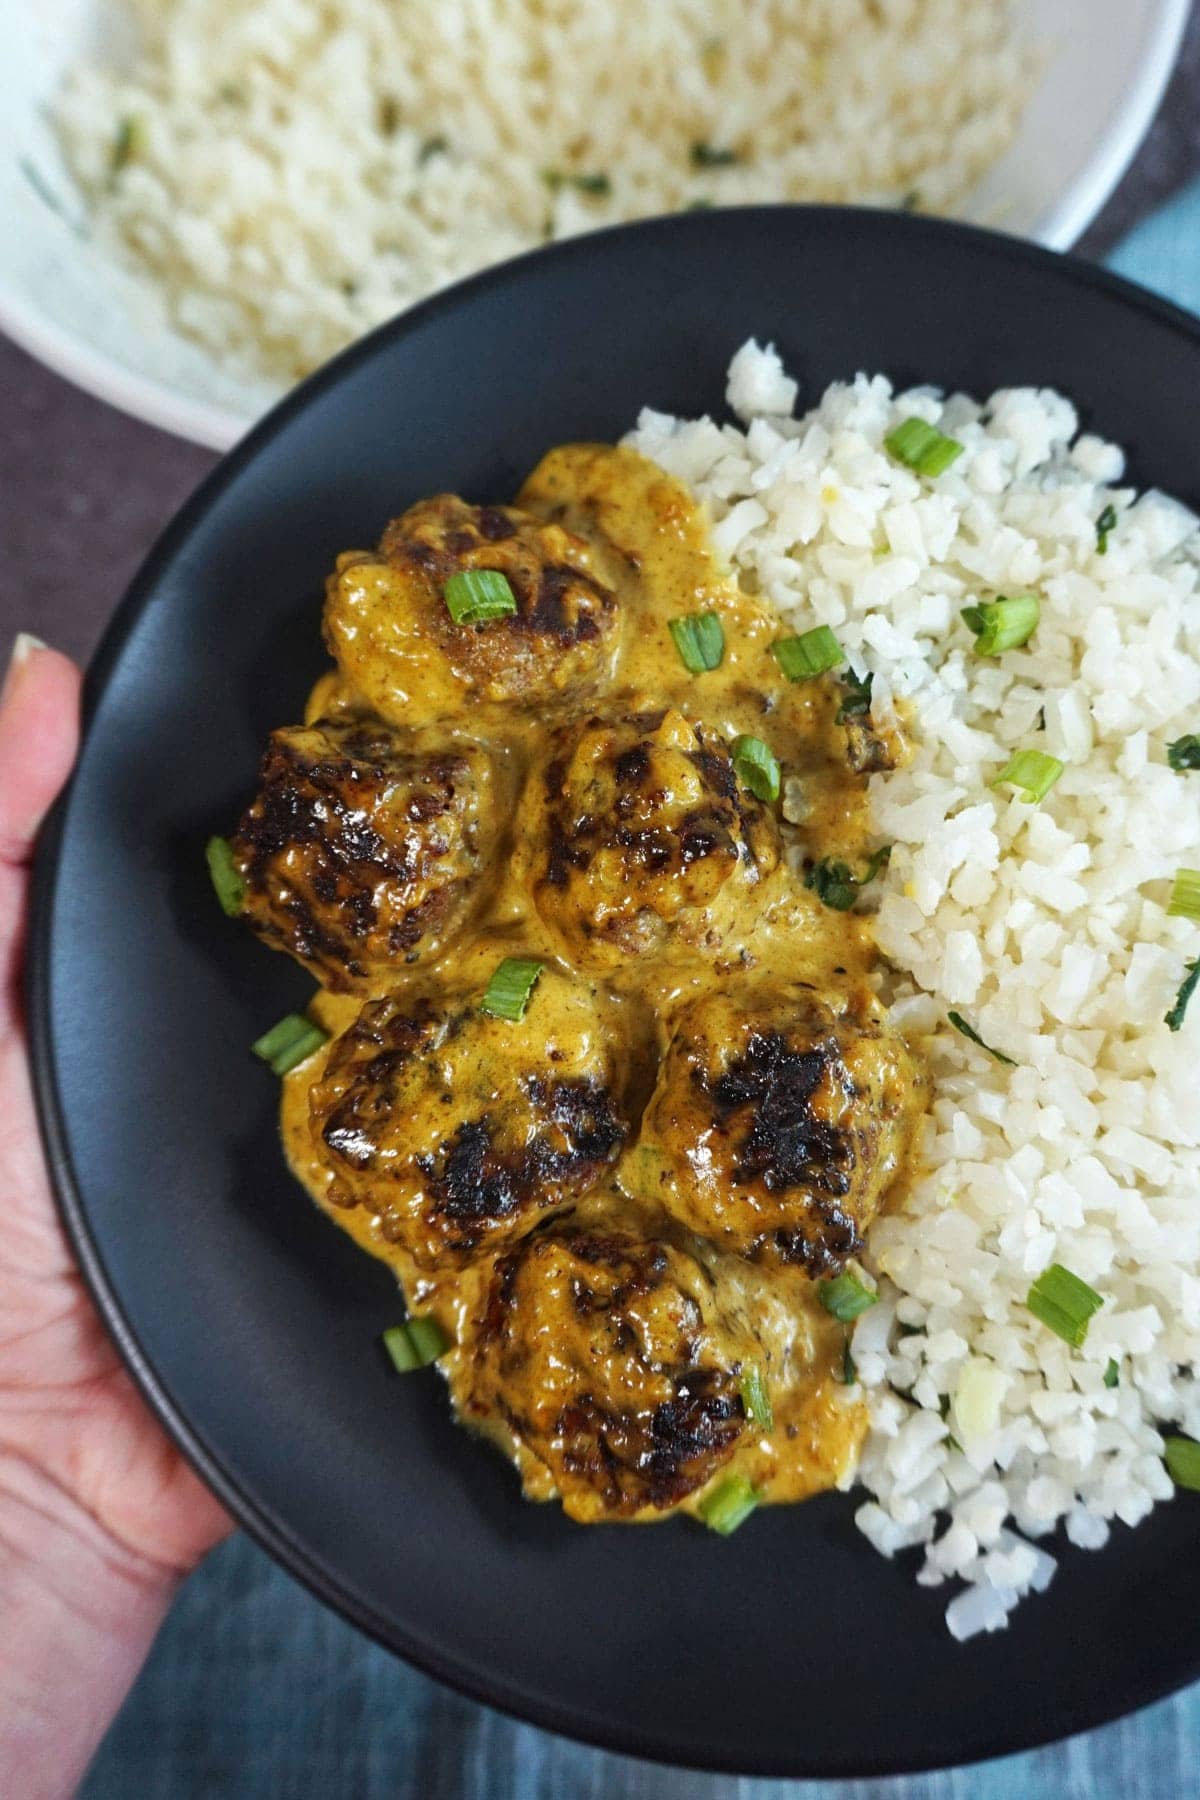 Plate of Keto Swedish Meatballs with Turmeric, a side of cauliflower rice, and topped with fresh green onions